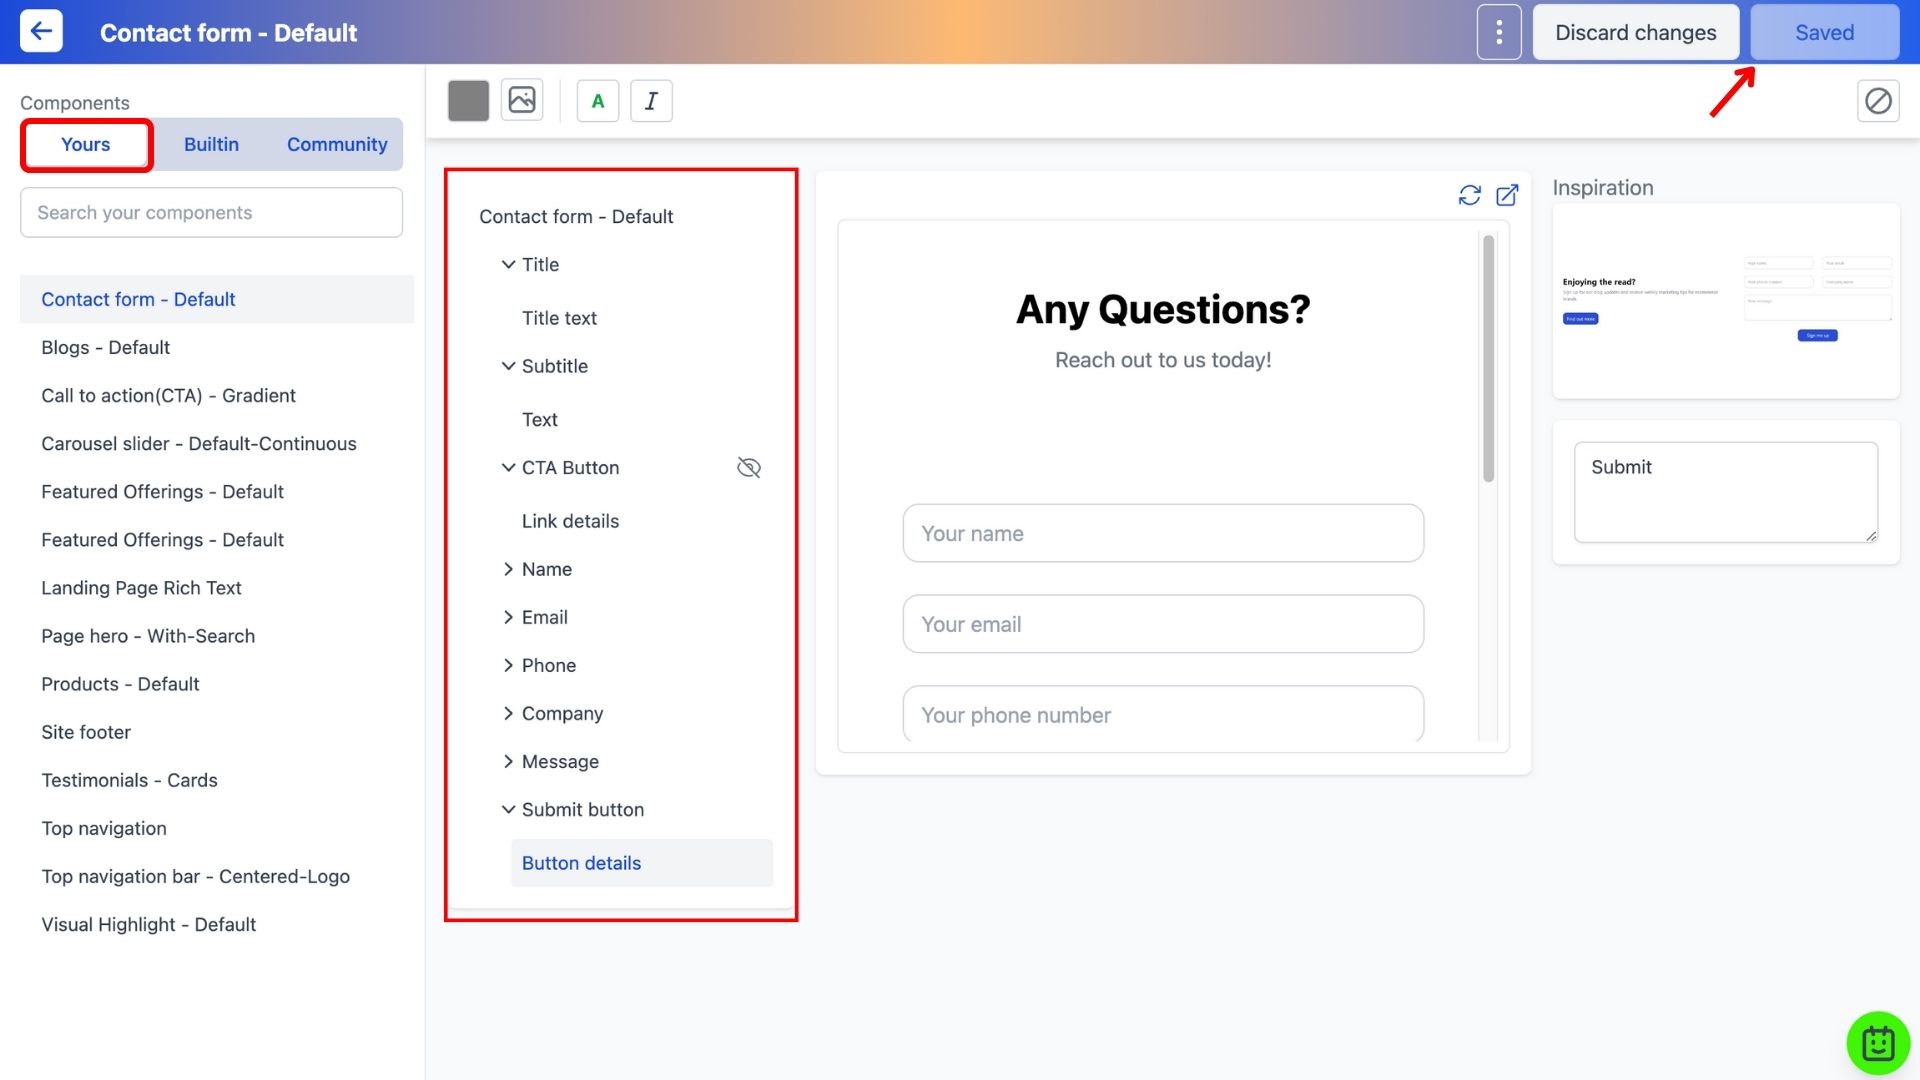 Editing content of the Contact form component